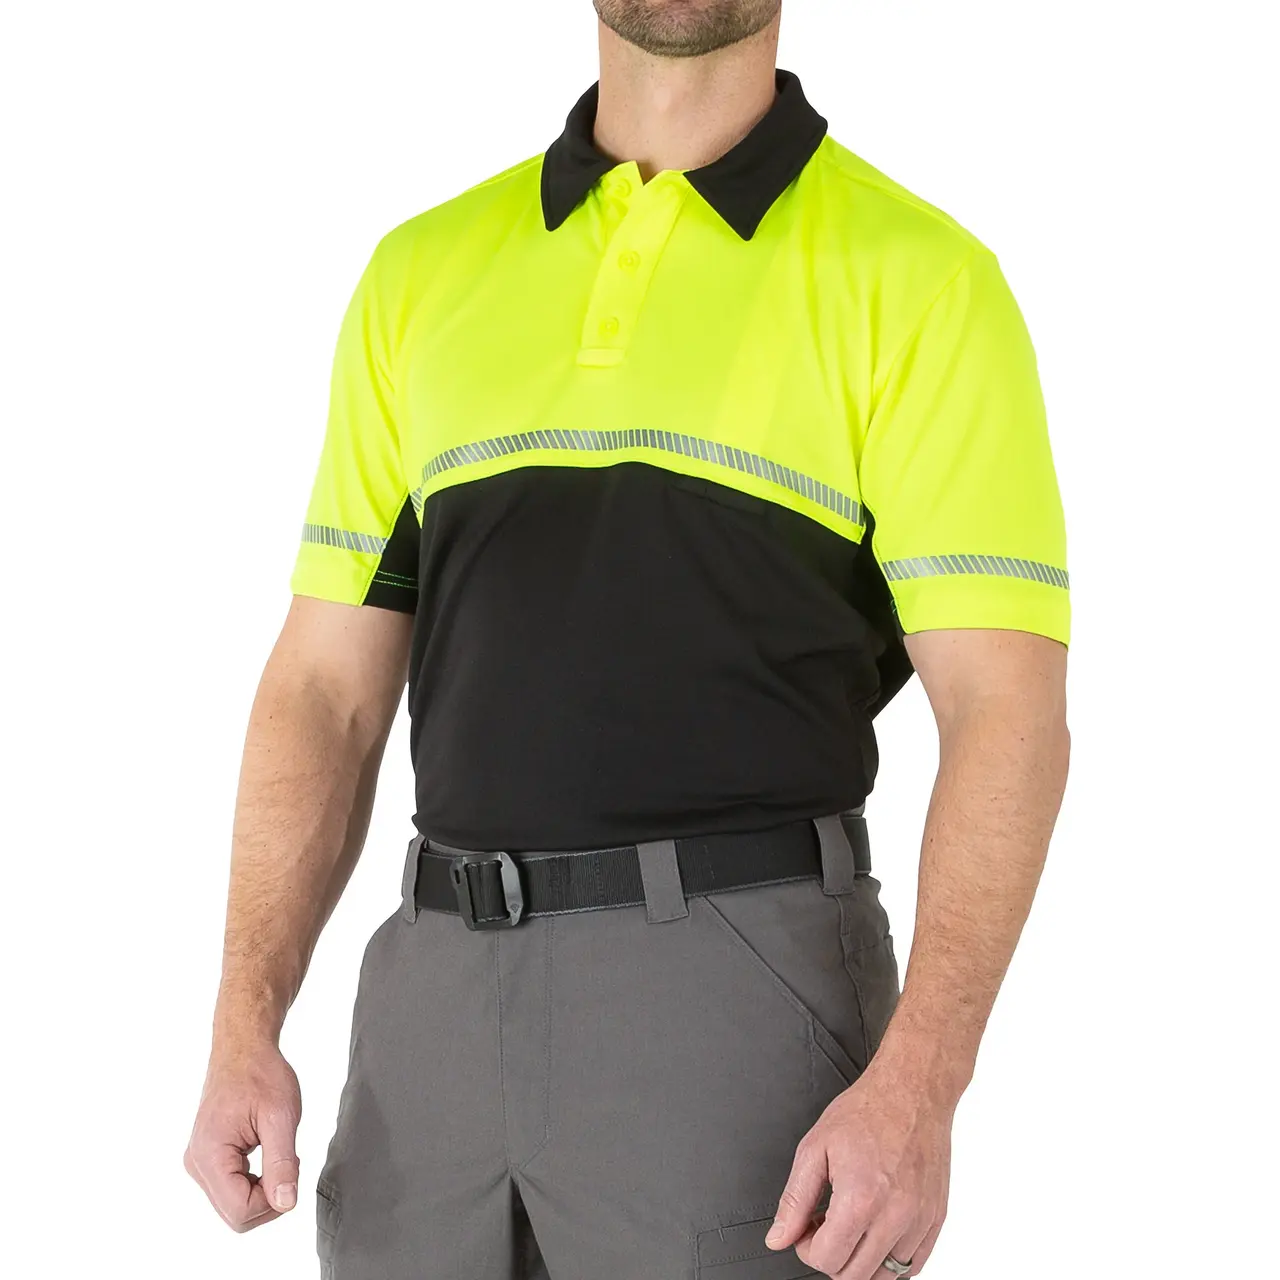 Hi-Vis Bike Patrol Polo Quick Dry Security Guard Officer Work Wear Uniform Polo Shirt With 3M Reflective Stripe